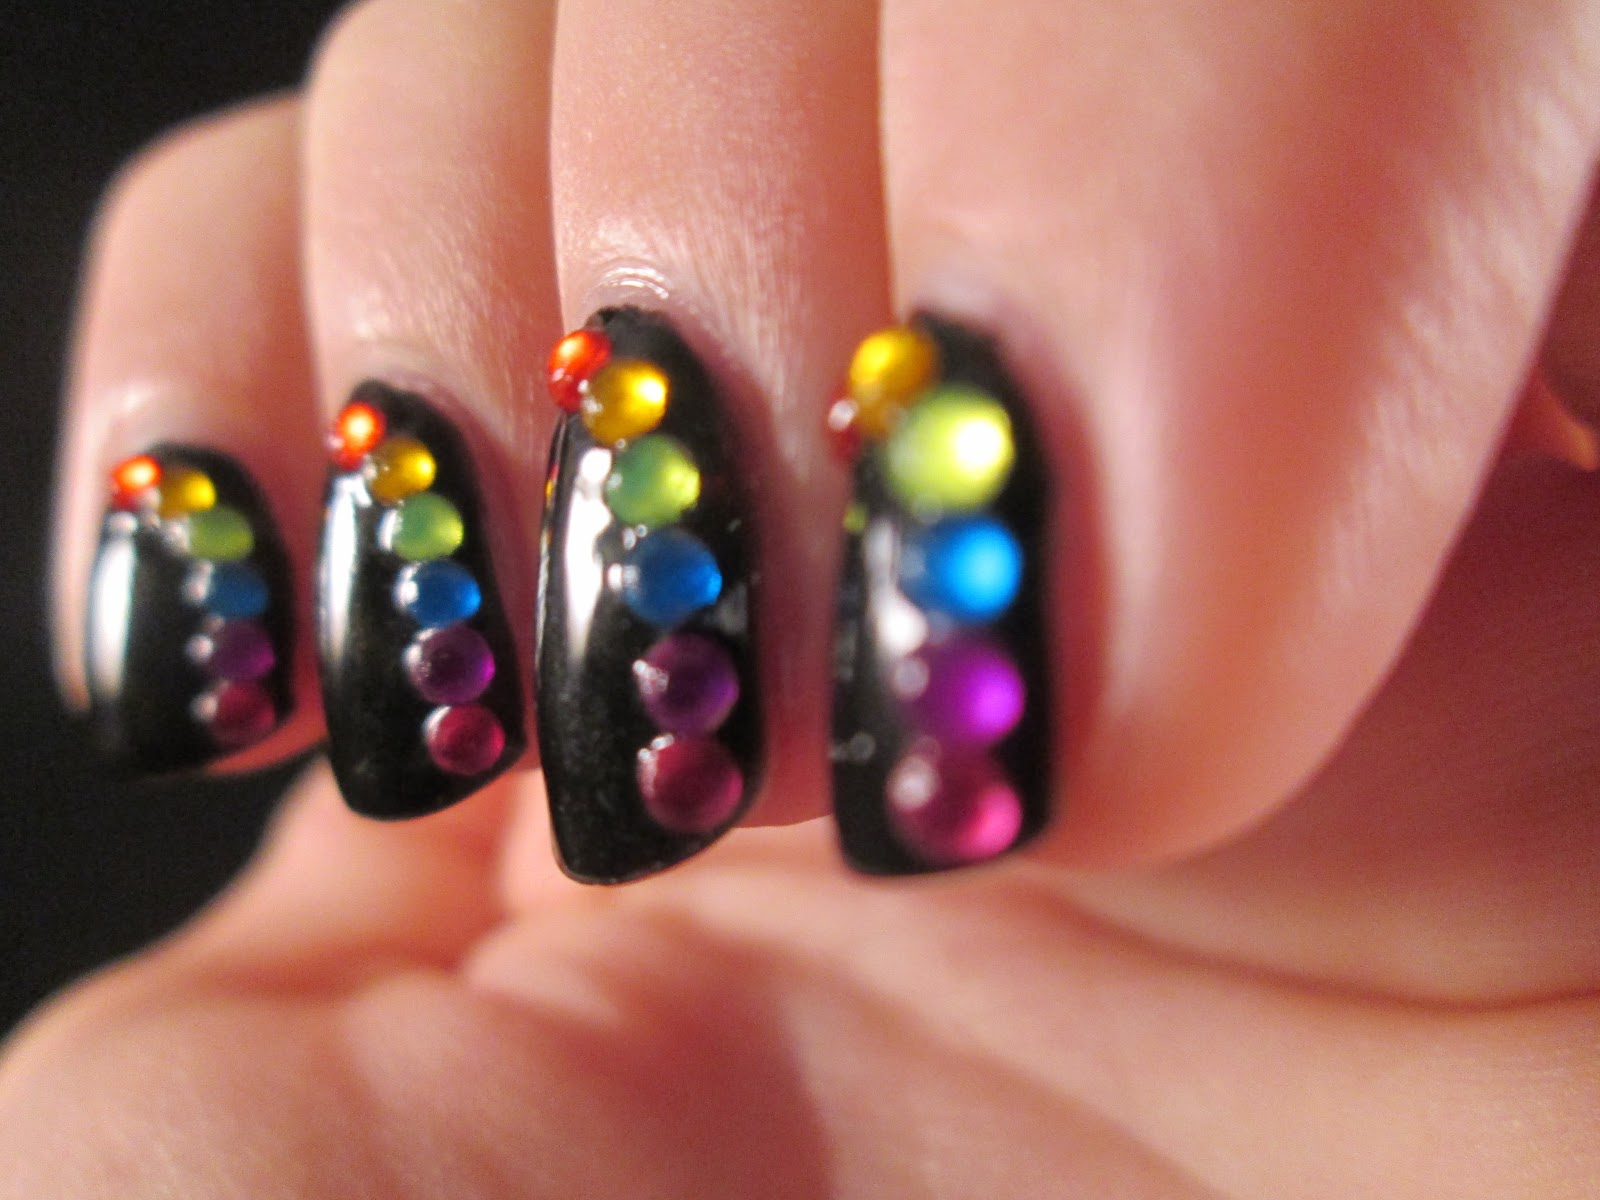 2. Nail Art Designs with Rhinestones - wide 4